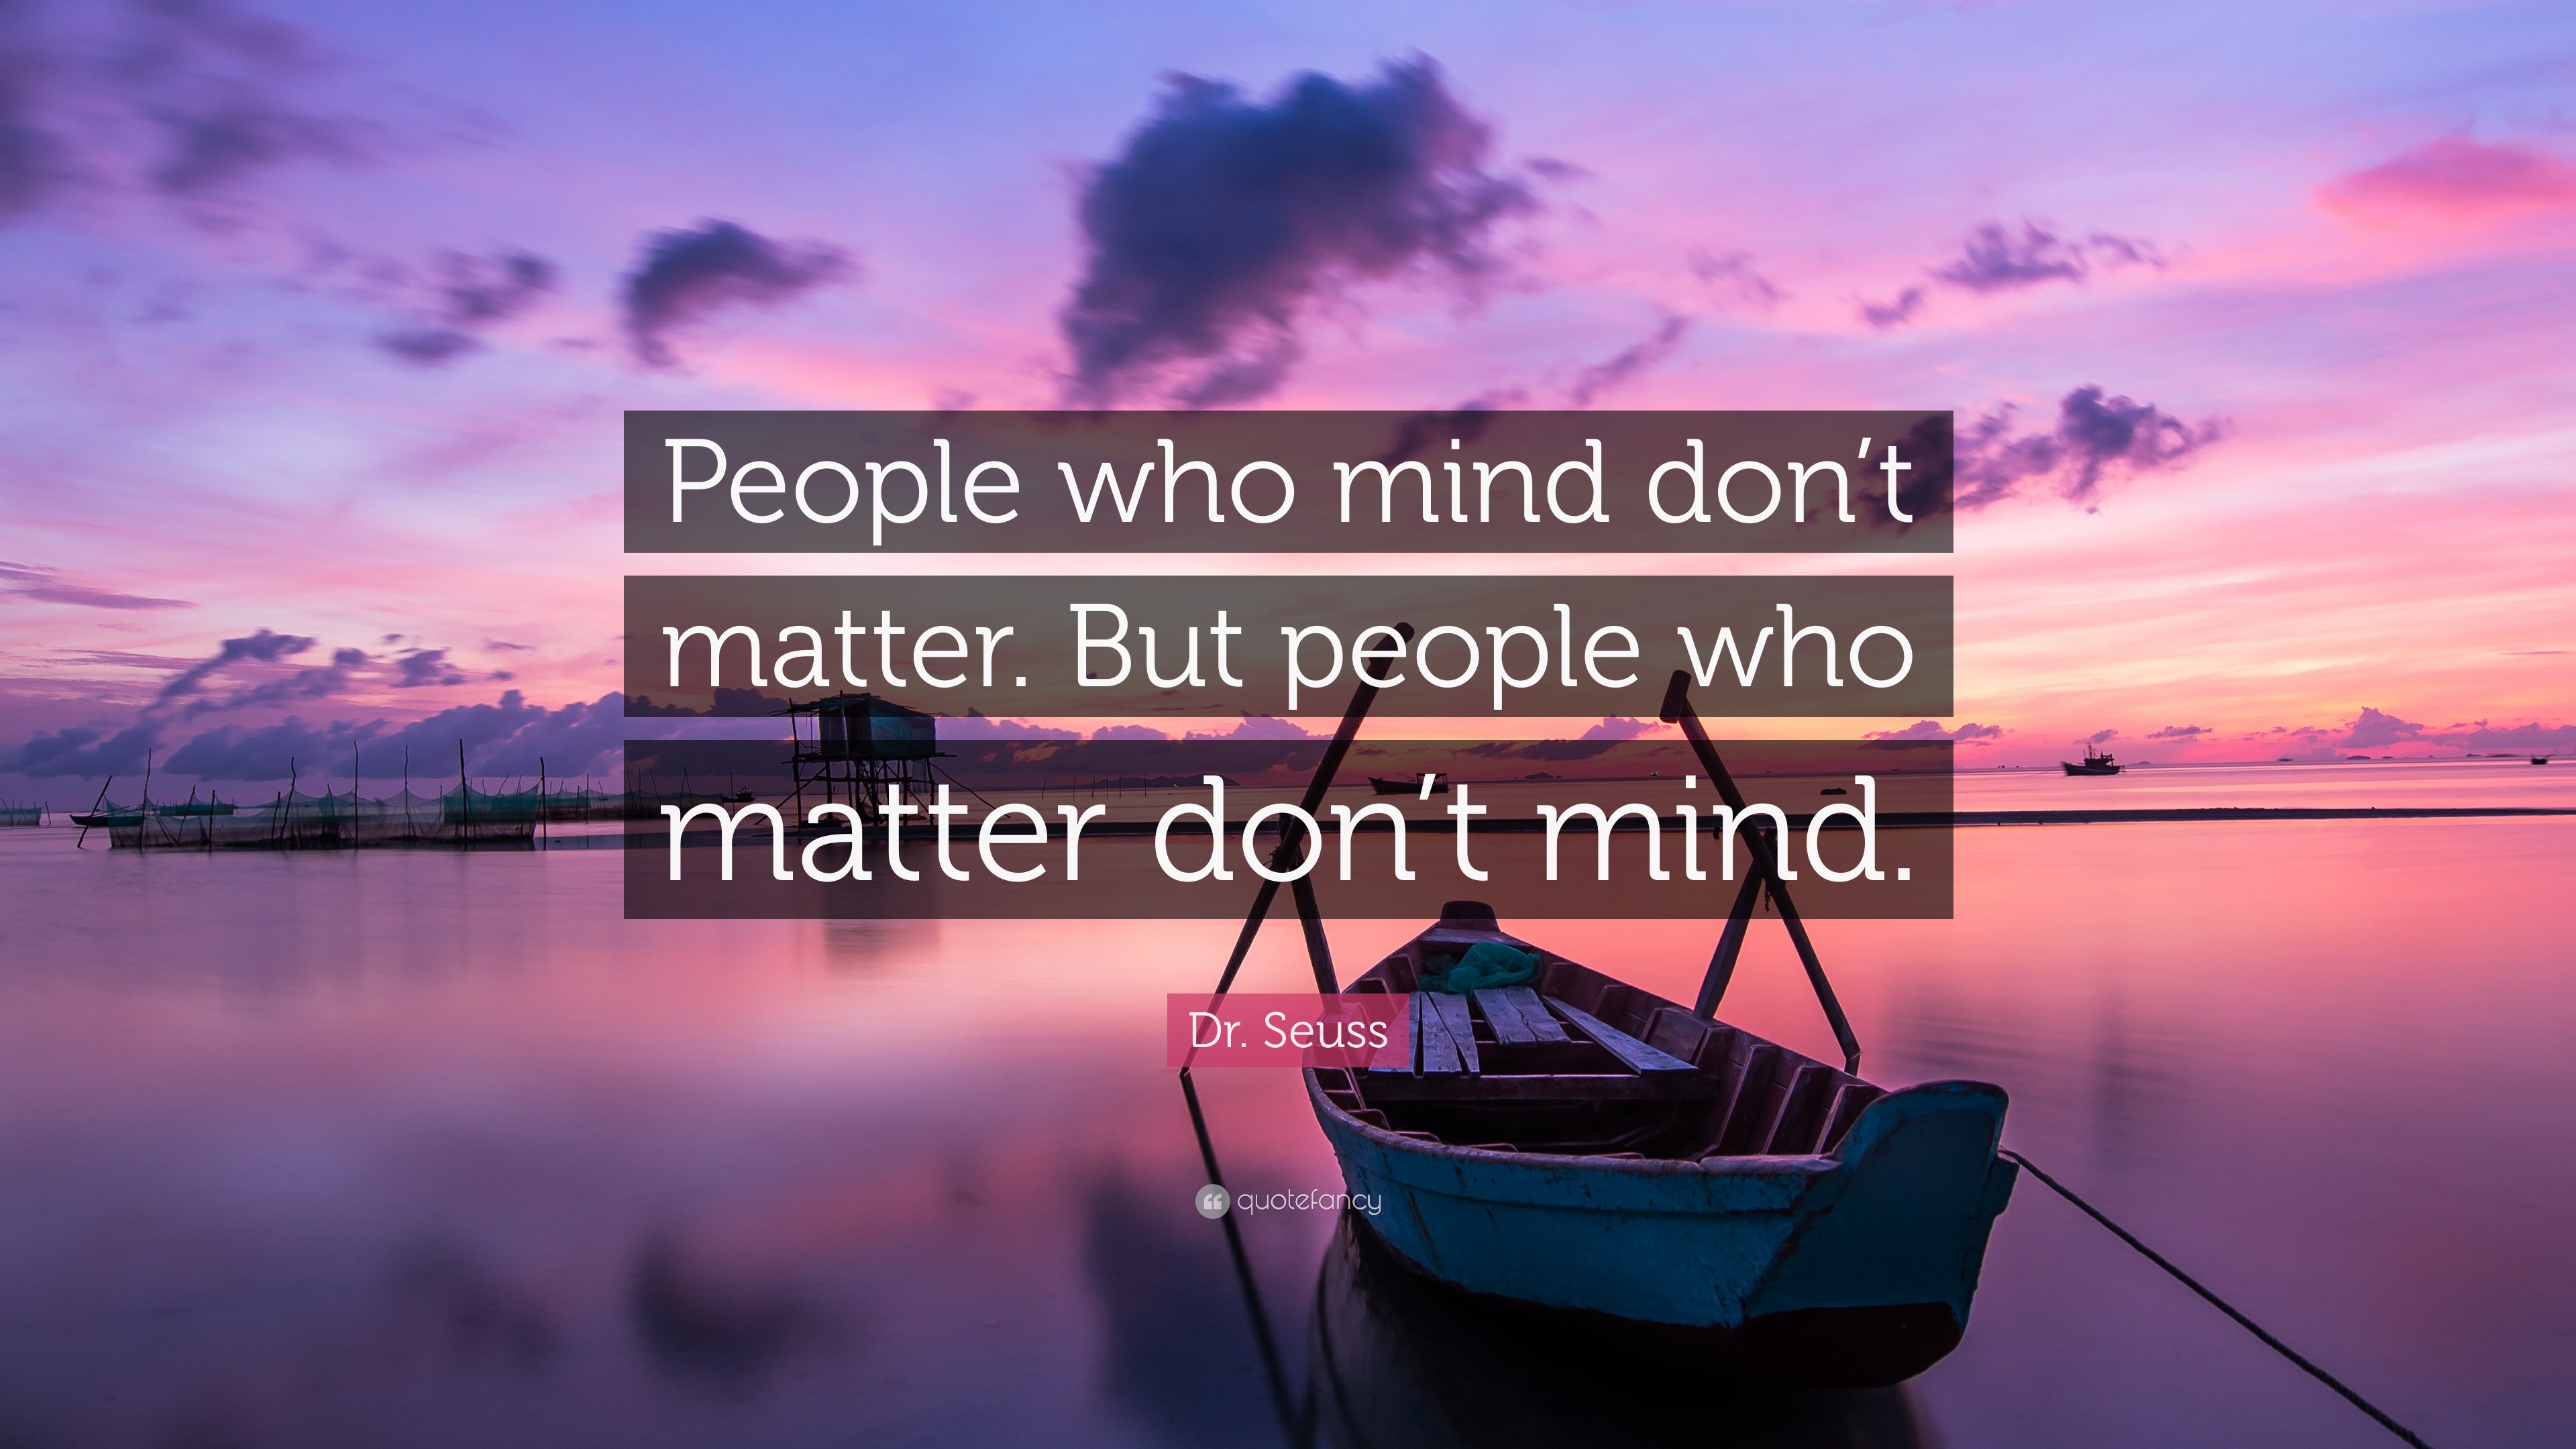 Dr. Seuss Quote: “People who mind don’t matter. But people who matter